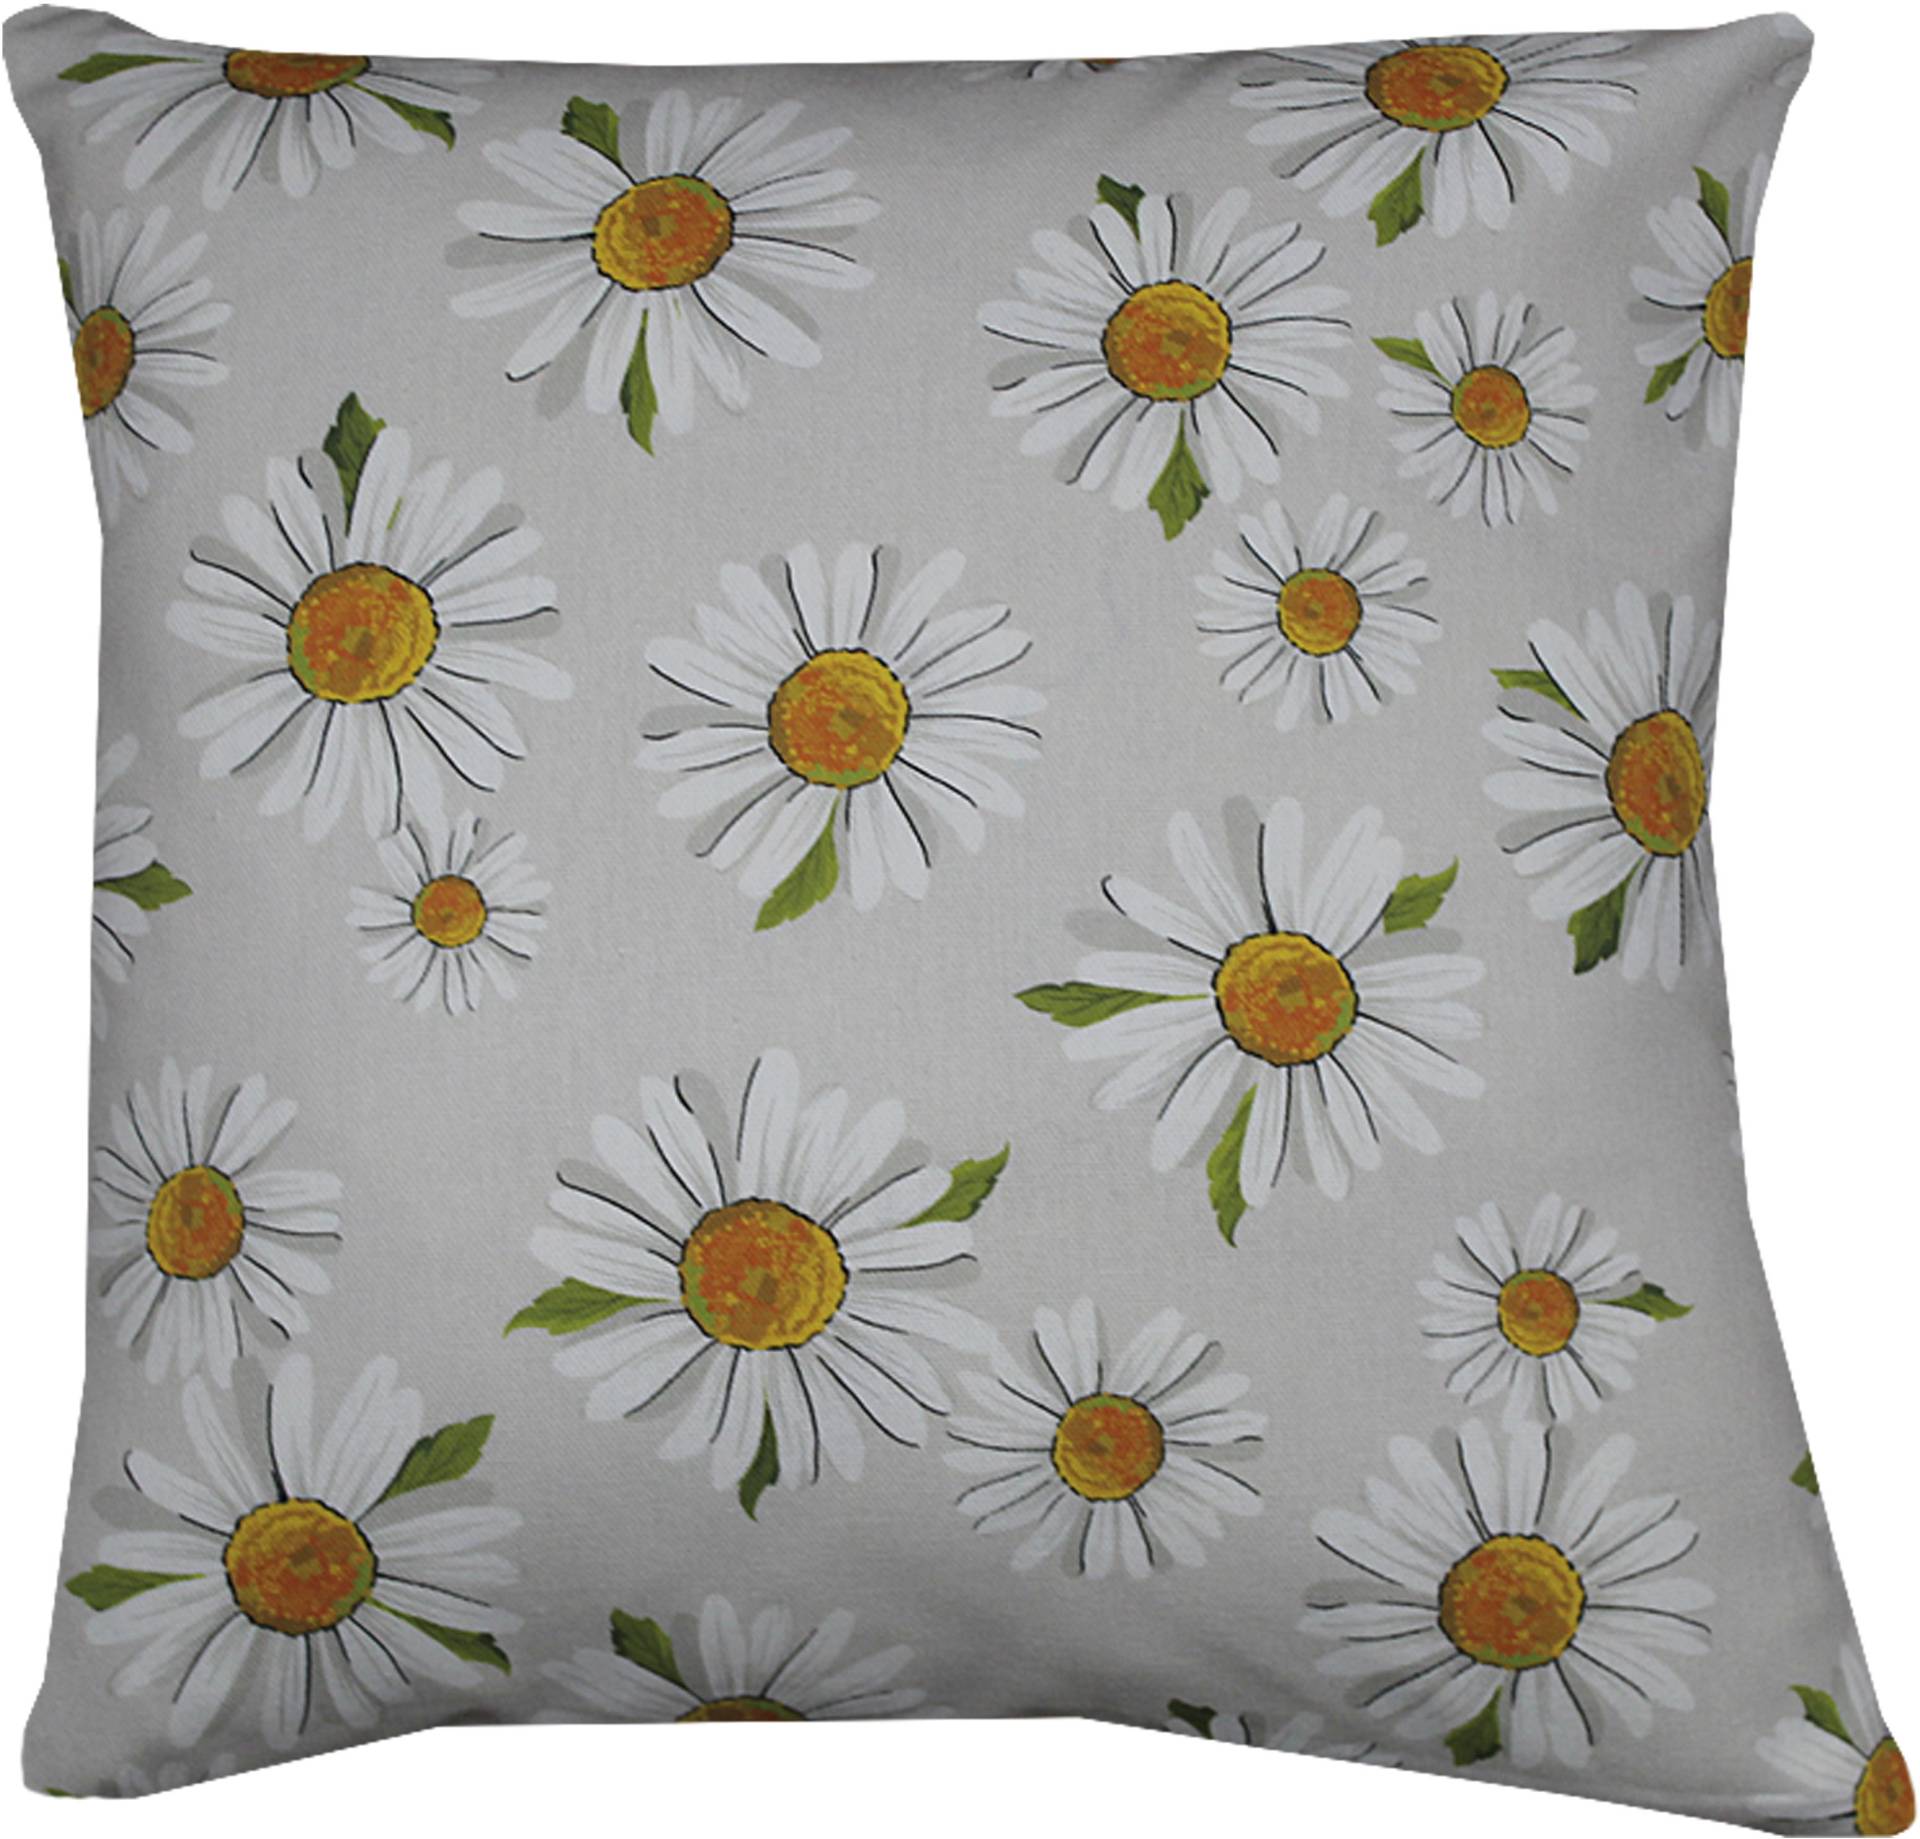 HOSSNER - HOMECOLLECTION Kissenhülle »Daisies«, (1 St.) von HOSSNER - HOMECOLLECTION